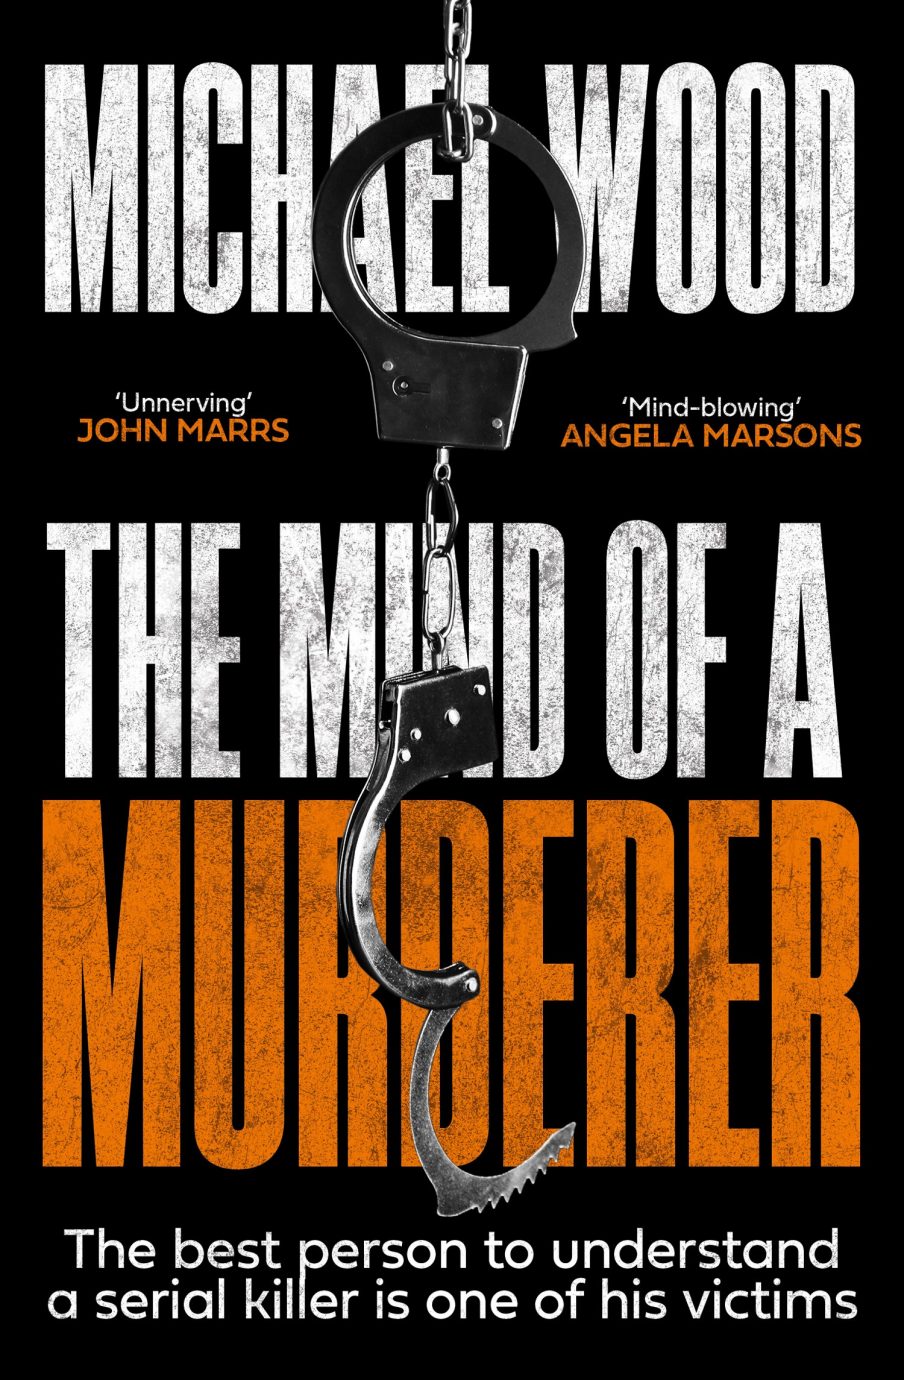 Image shows cover of The Mind of a Murderer by Michael Wood